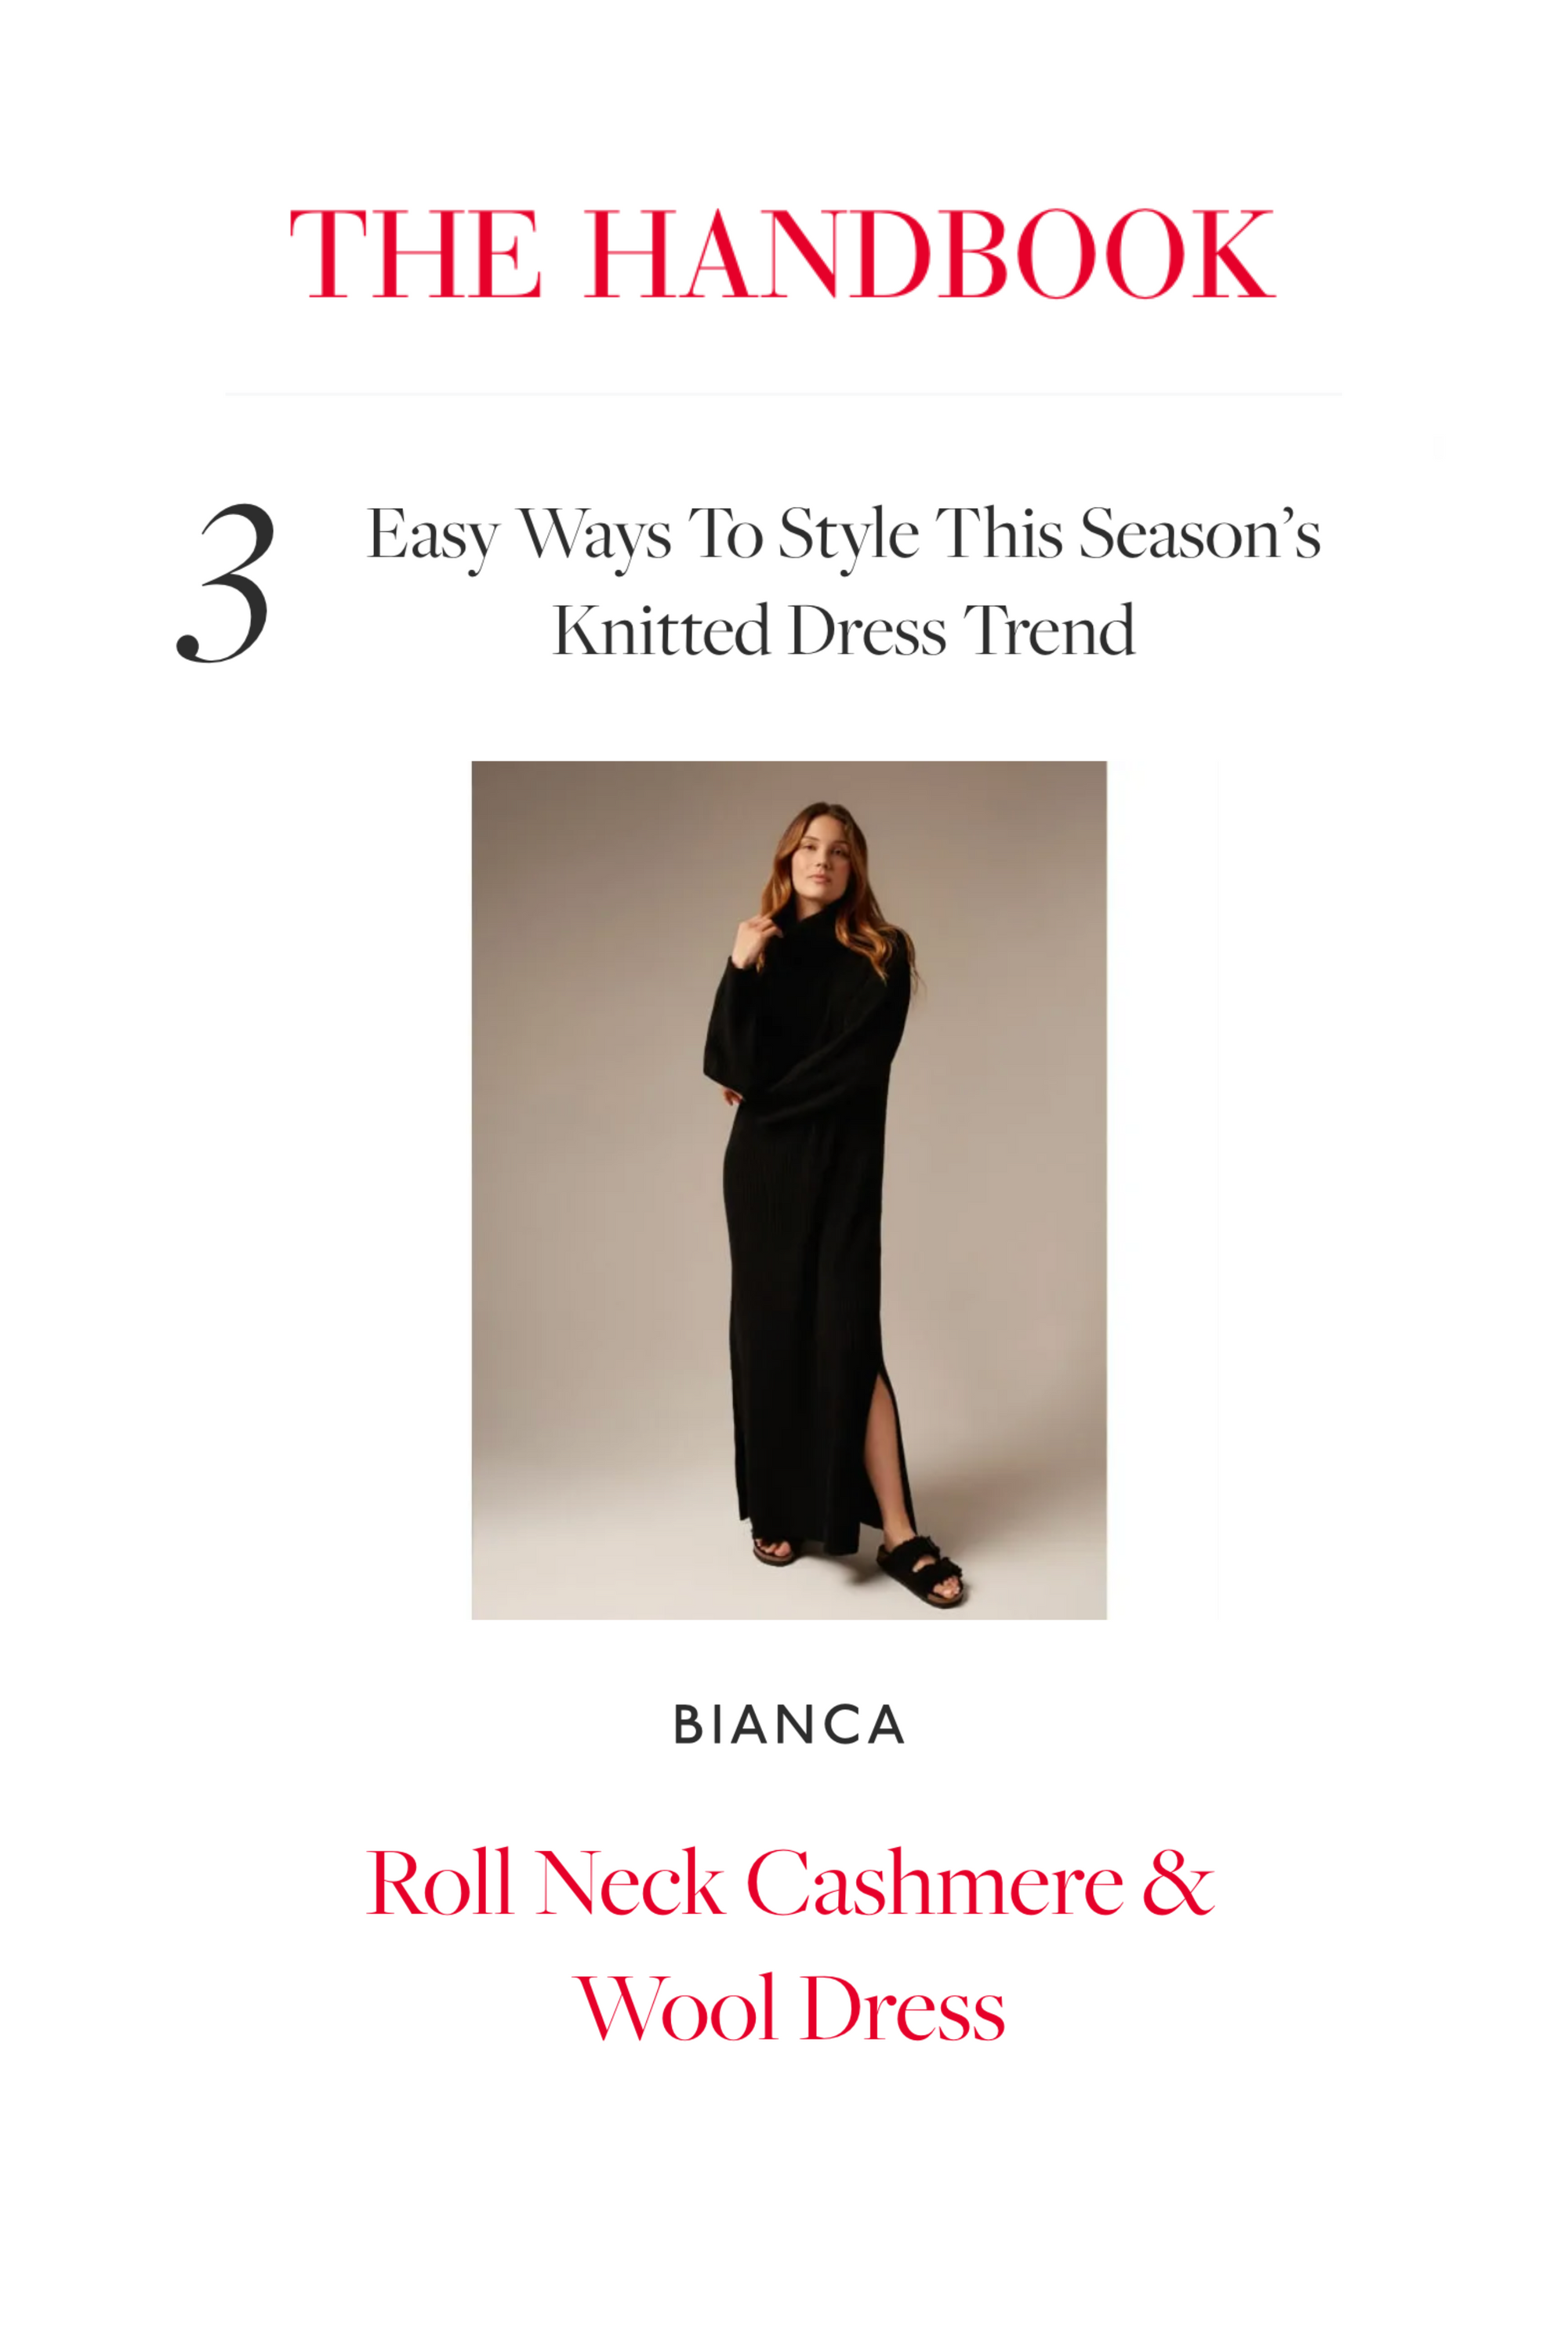 THE HANDBOOK | 3 EASY WAYS TO STYLE THIS SEASON'S KNITTED DRESS TREND